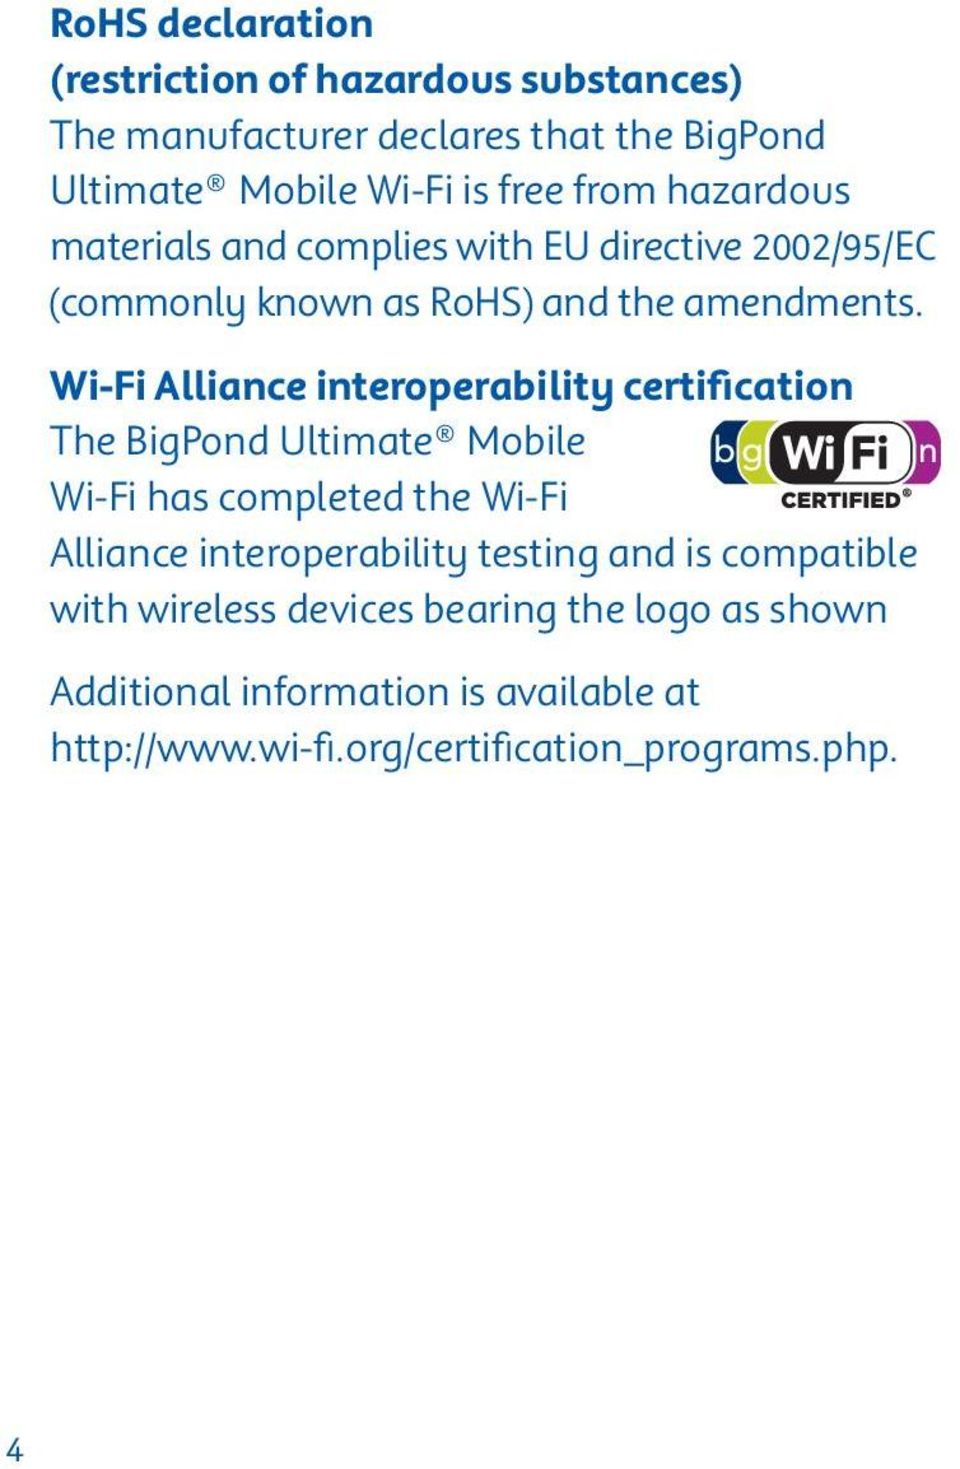 Wi-Fi Alliance interoperability certification The BigPond Ultimate Mobile Wi-Fi has completed the Wi-Fi Alliance interoperability